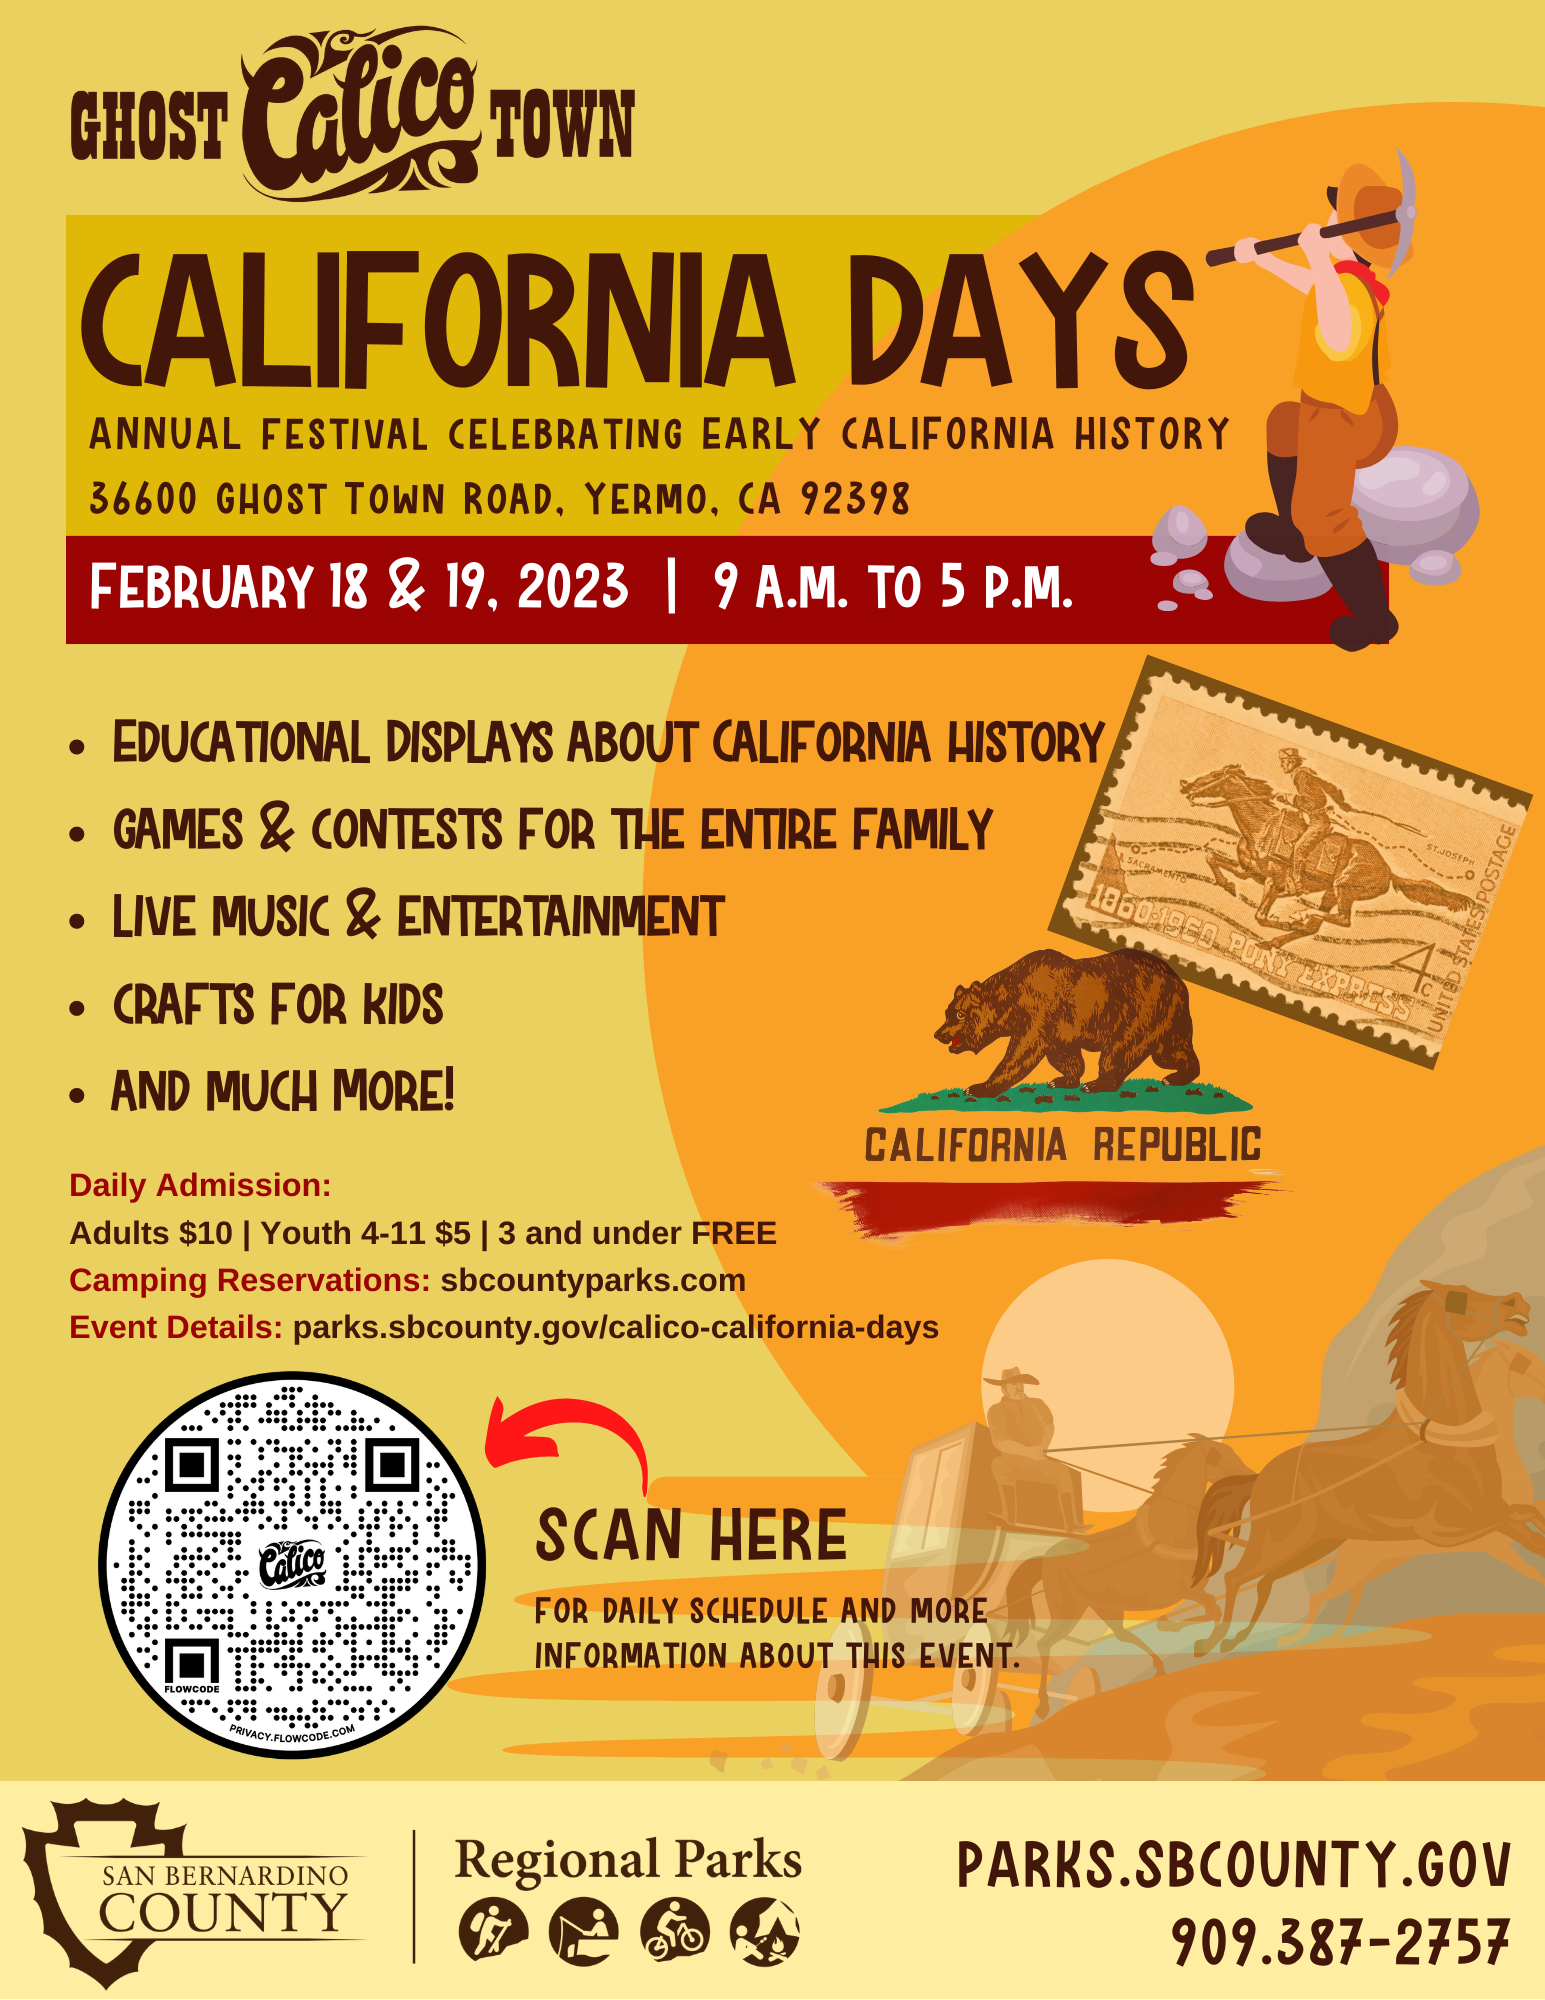 An Old-West graphic background with a QR code and the date of February 19-19, 2023 and California Days event title.